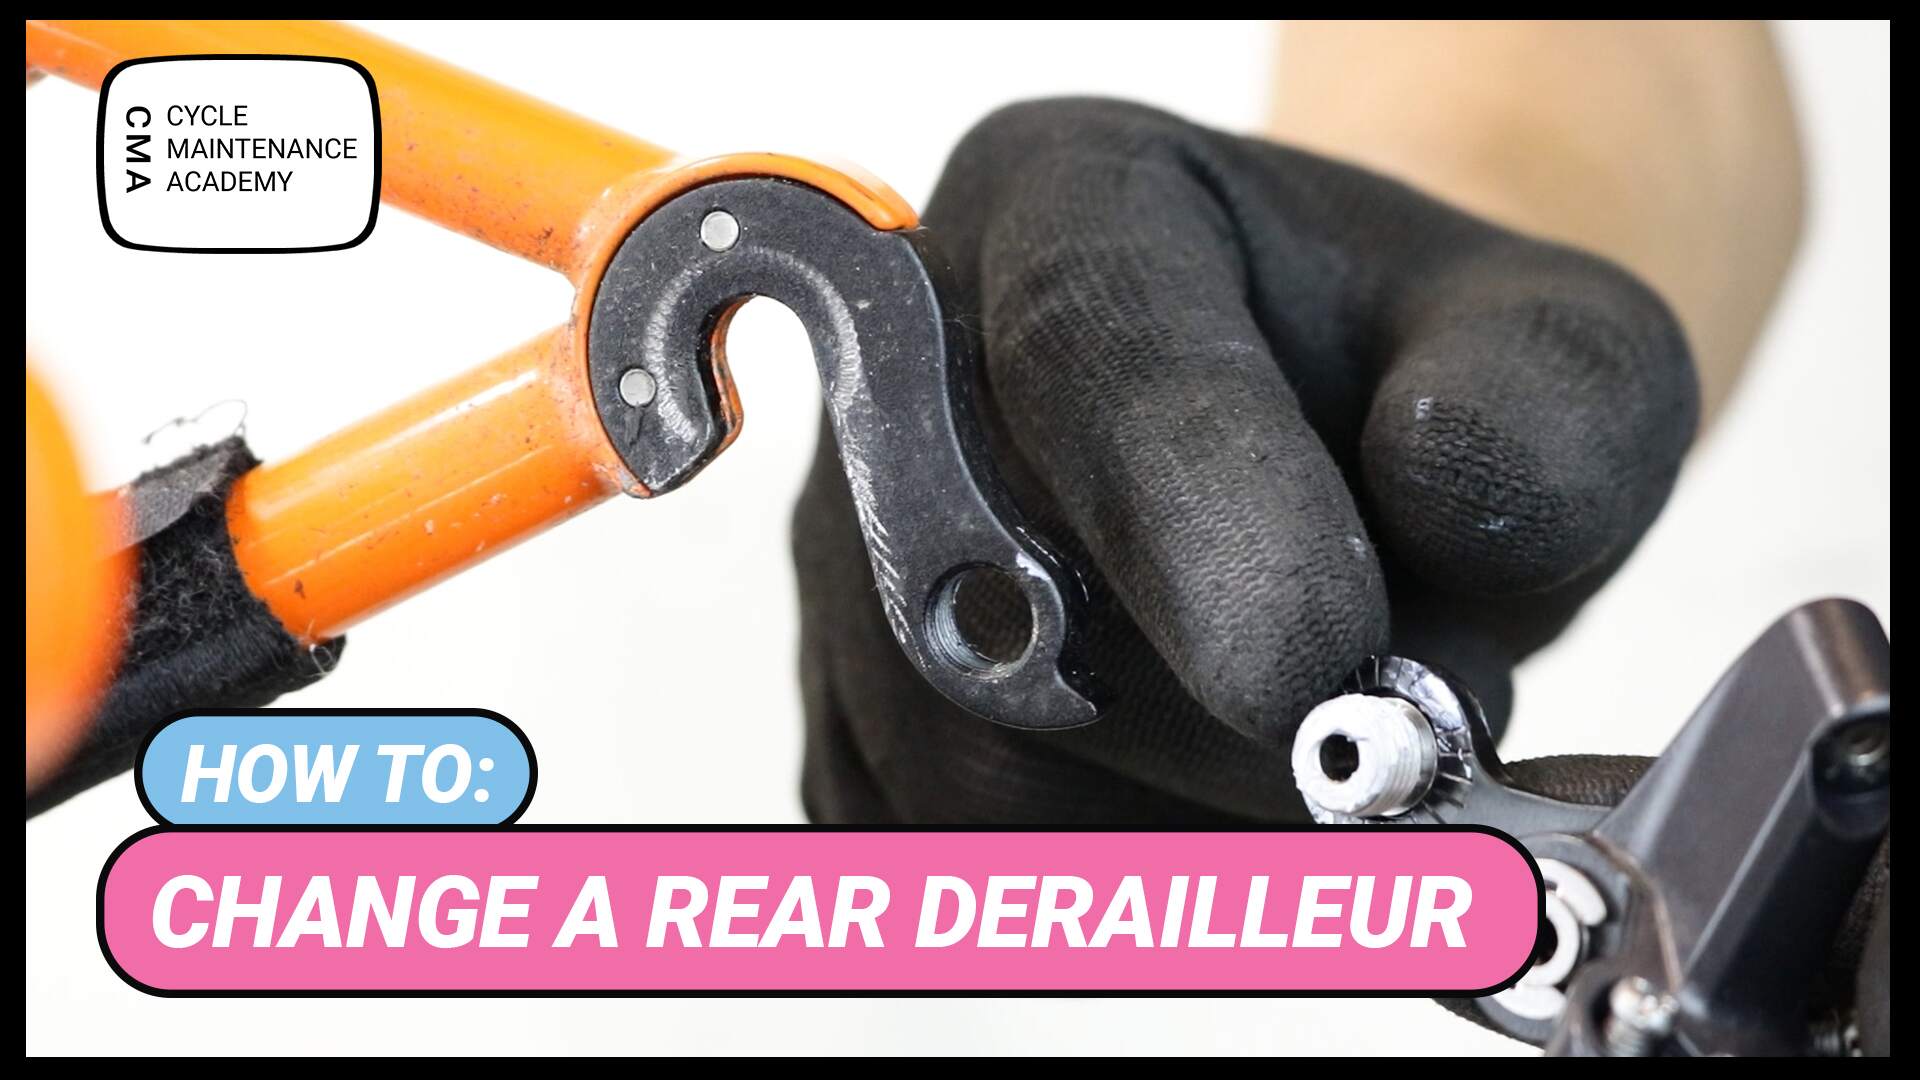 How To Reattach Rear Derailleur How to replace rear derailleur - Cycle Maintenance Academy